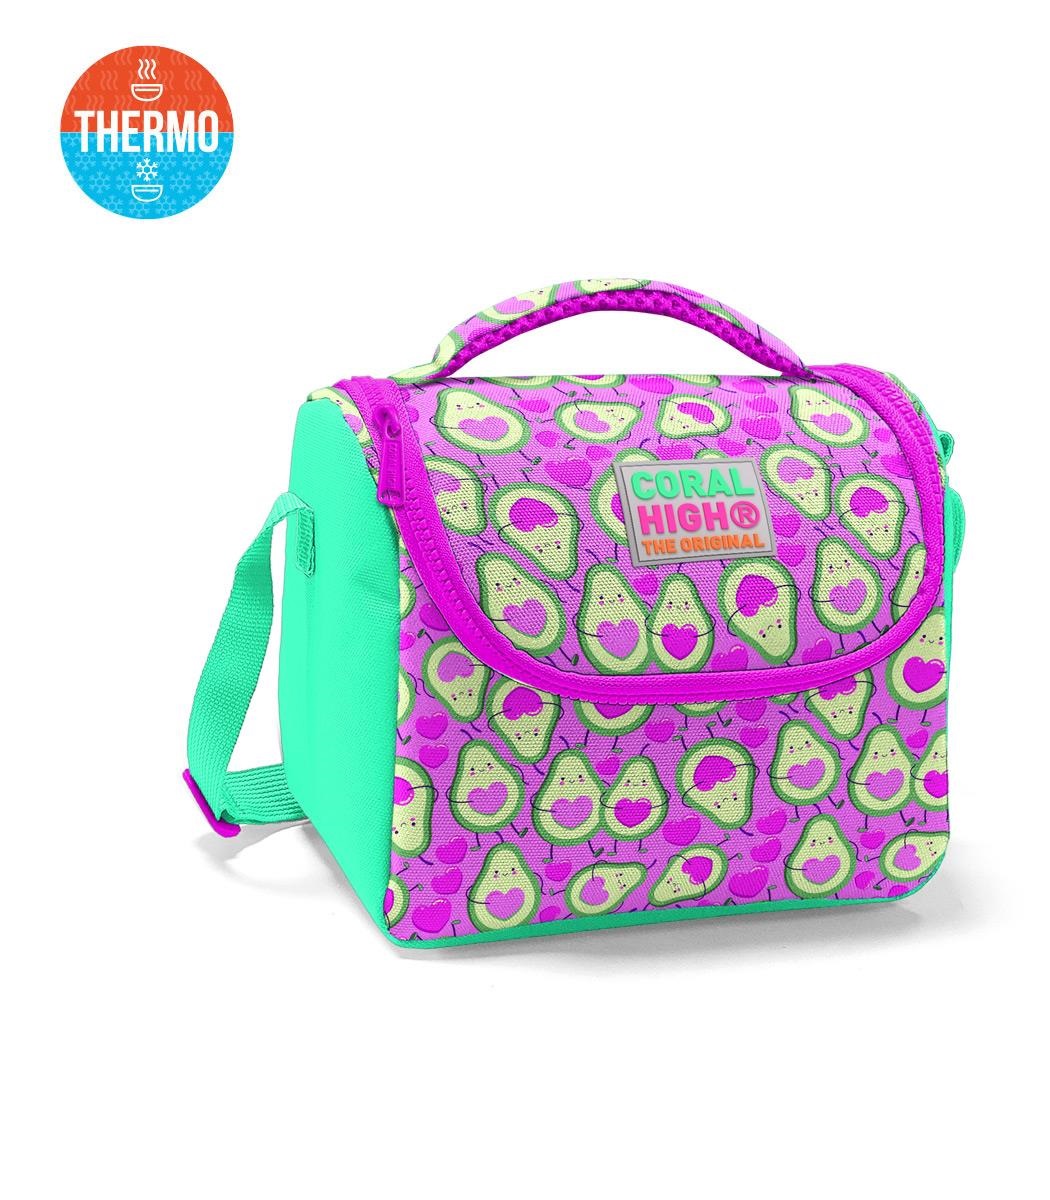 Coral High Kids Thermal Lunch Bag - Pink Water Green Avocado Patterned